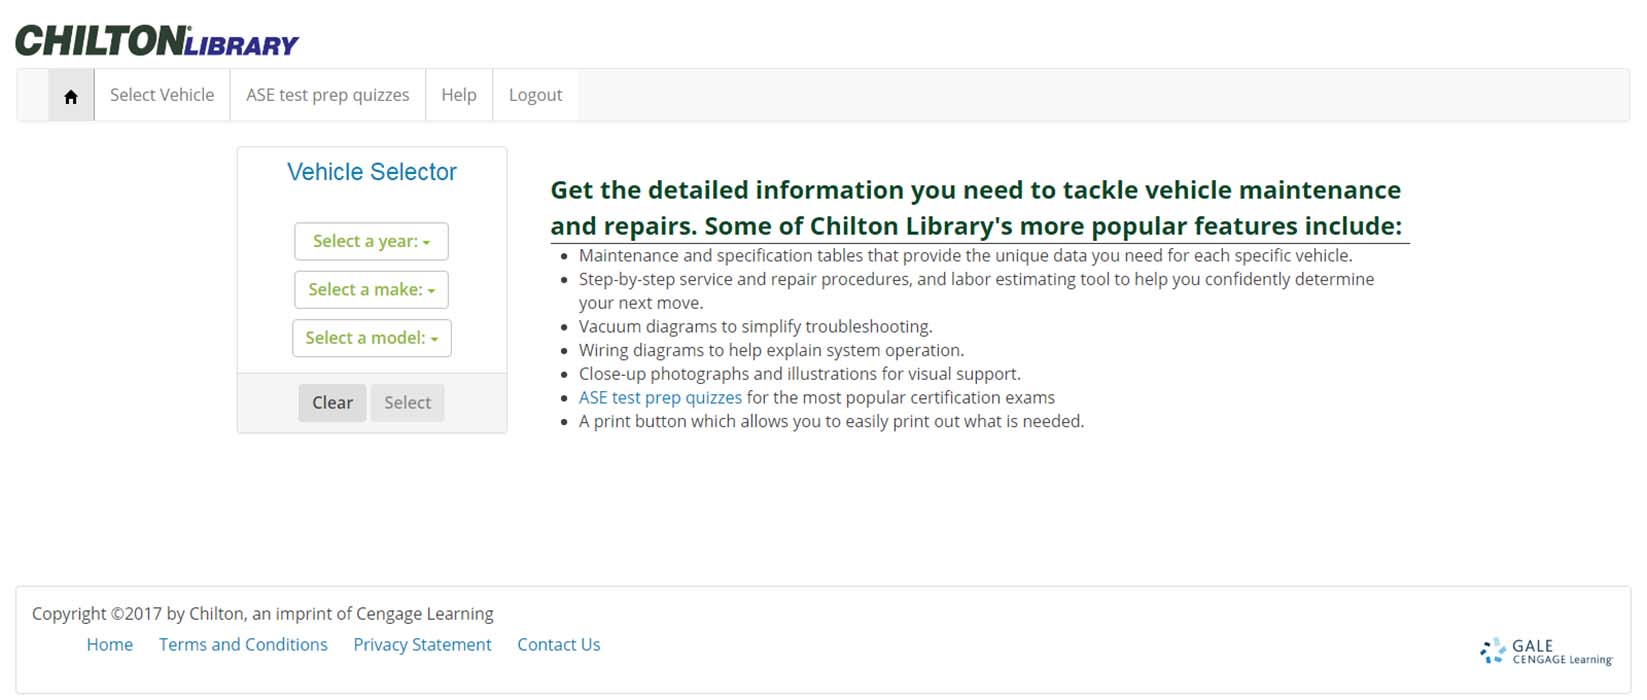 Chilton Library webpage where you can get step-by-step repair instructions.